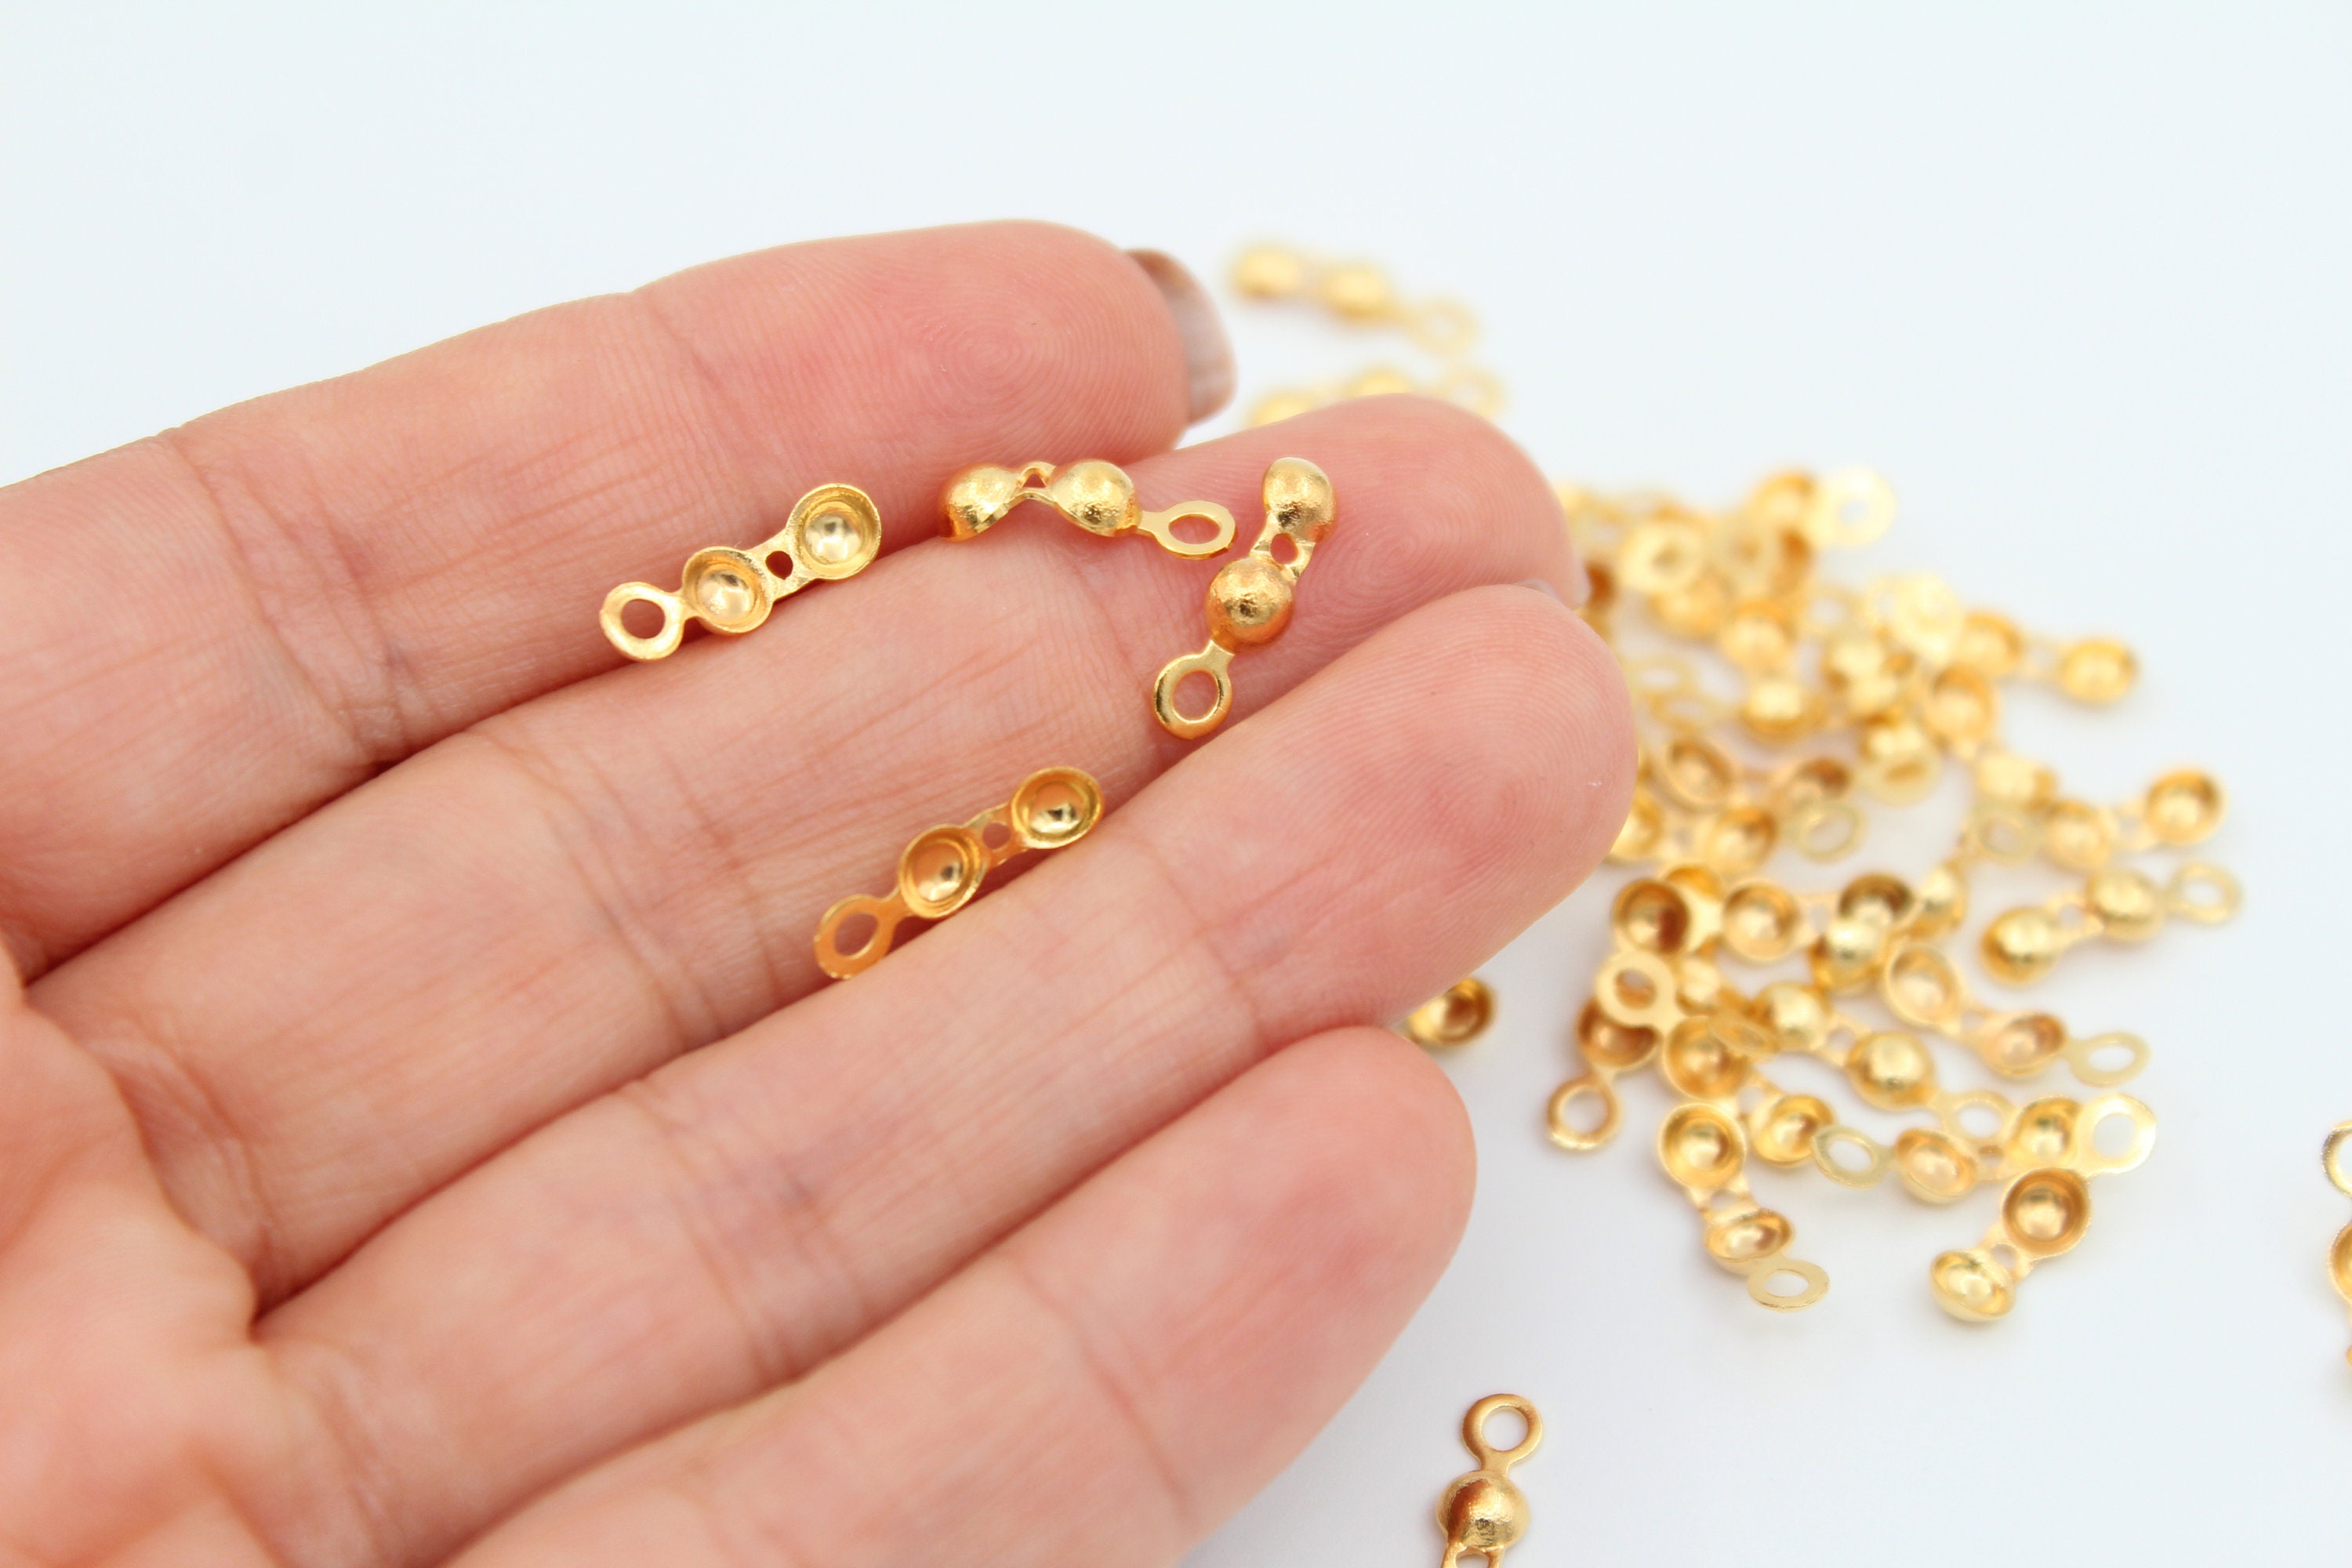 Bead Tips ZK002 Crimps 4x13mm 24 k Shiny Gold Clamshell Bead Tip,Gold Crimp Beads Ball Chain Clasp